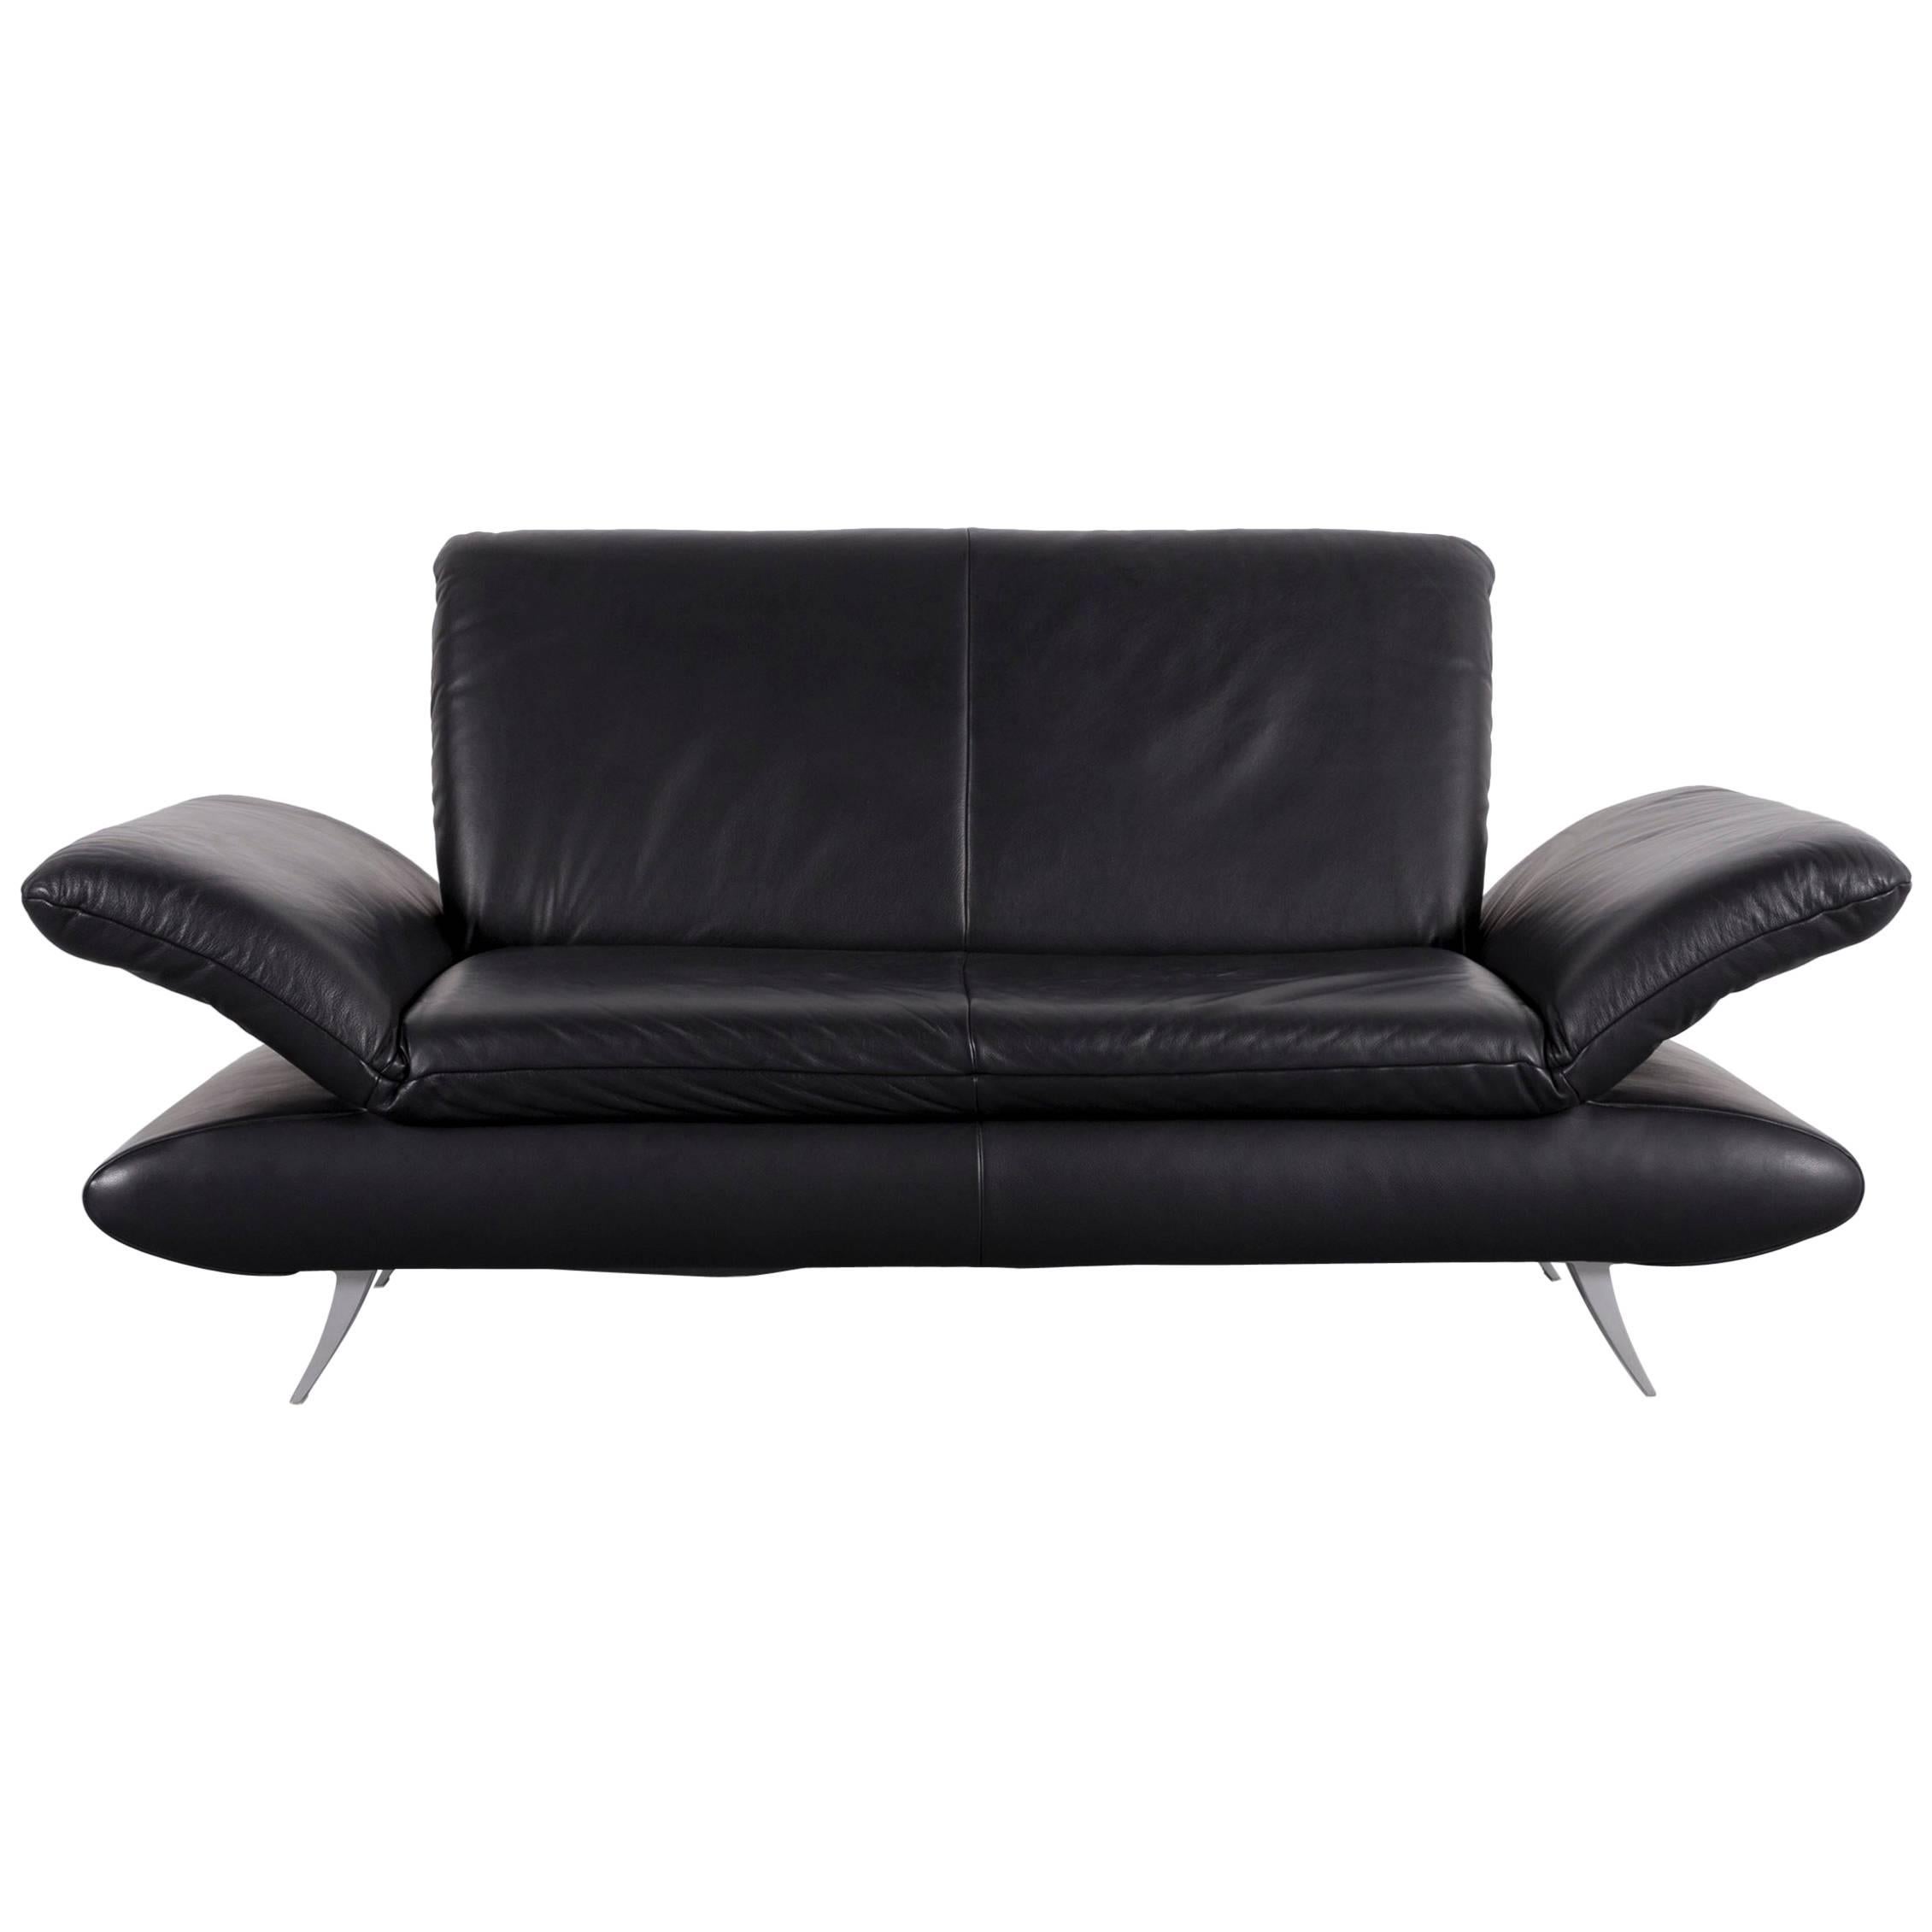 Koinor Rossini Designer Leather Sofa in Black with Functions Two-Seat